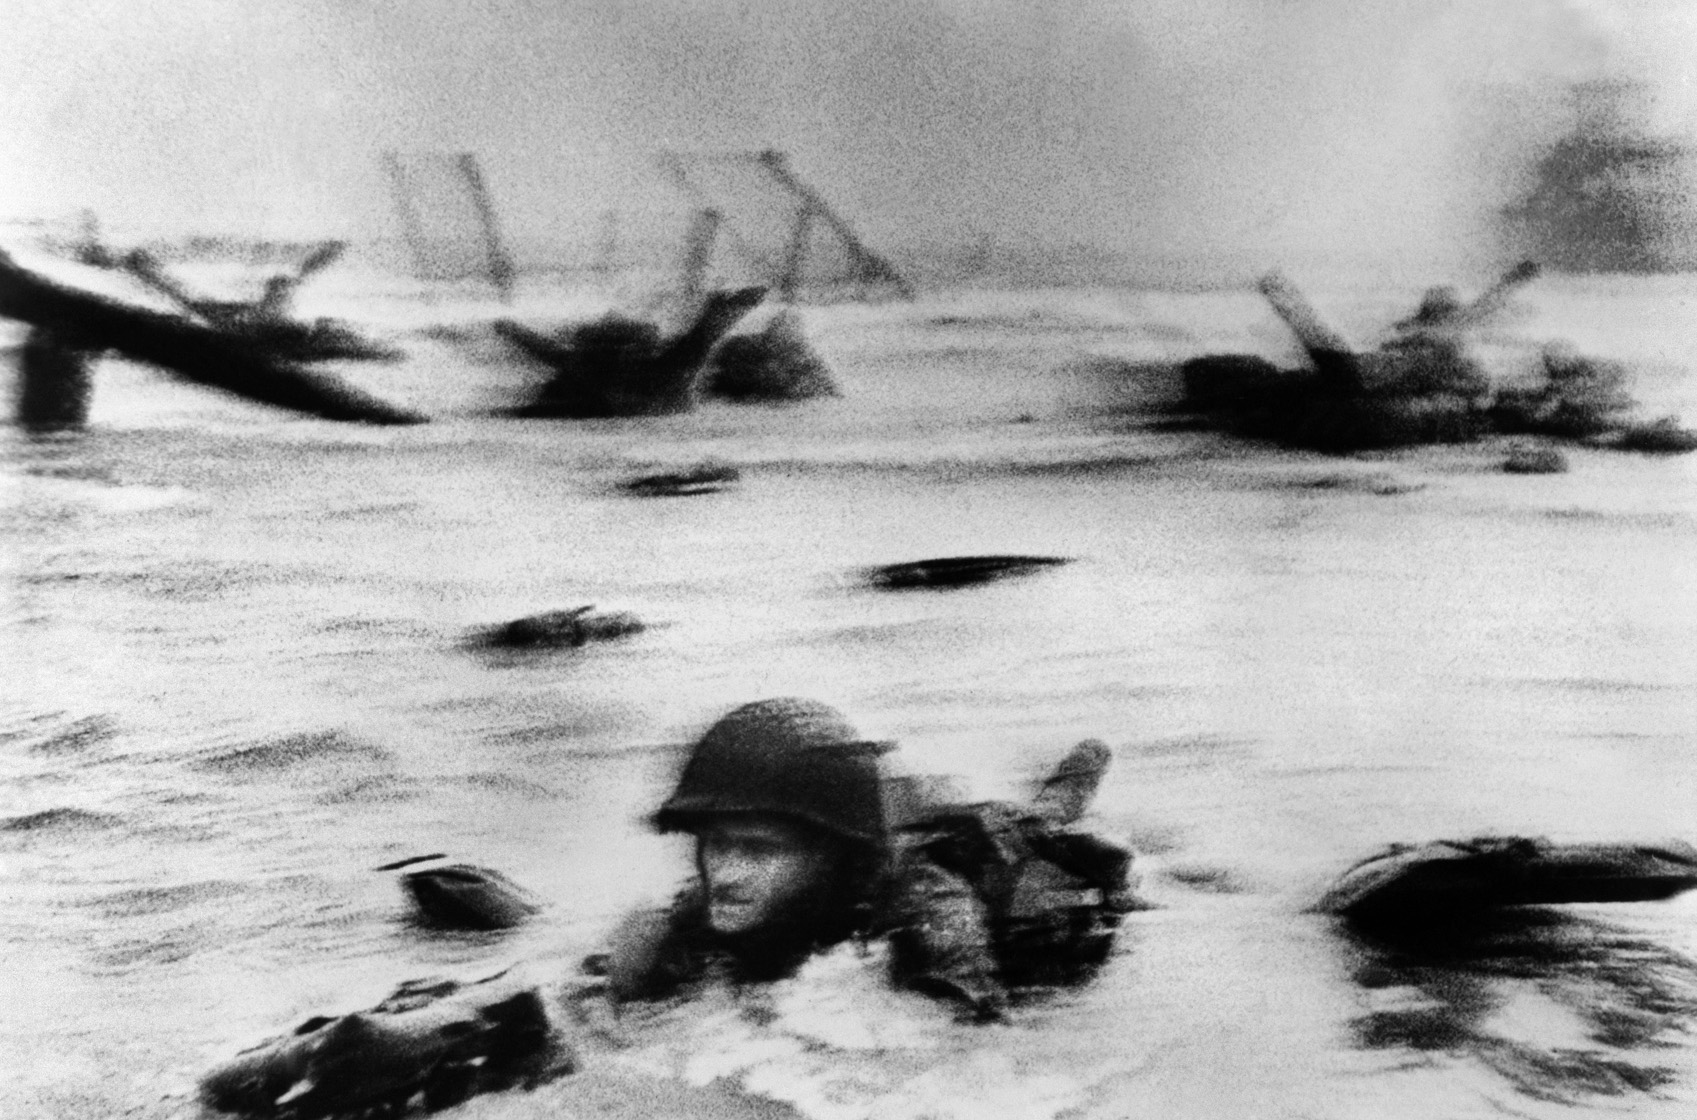 Having made it to the water’s edge, Capa turned and snapped this photo of a GI crawling behind him through the surf, hoping to find a place of safety. The soldier has been identified as either Huston Riley or Edeward Regan. 